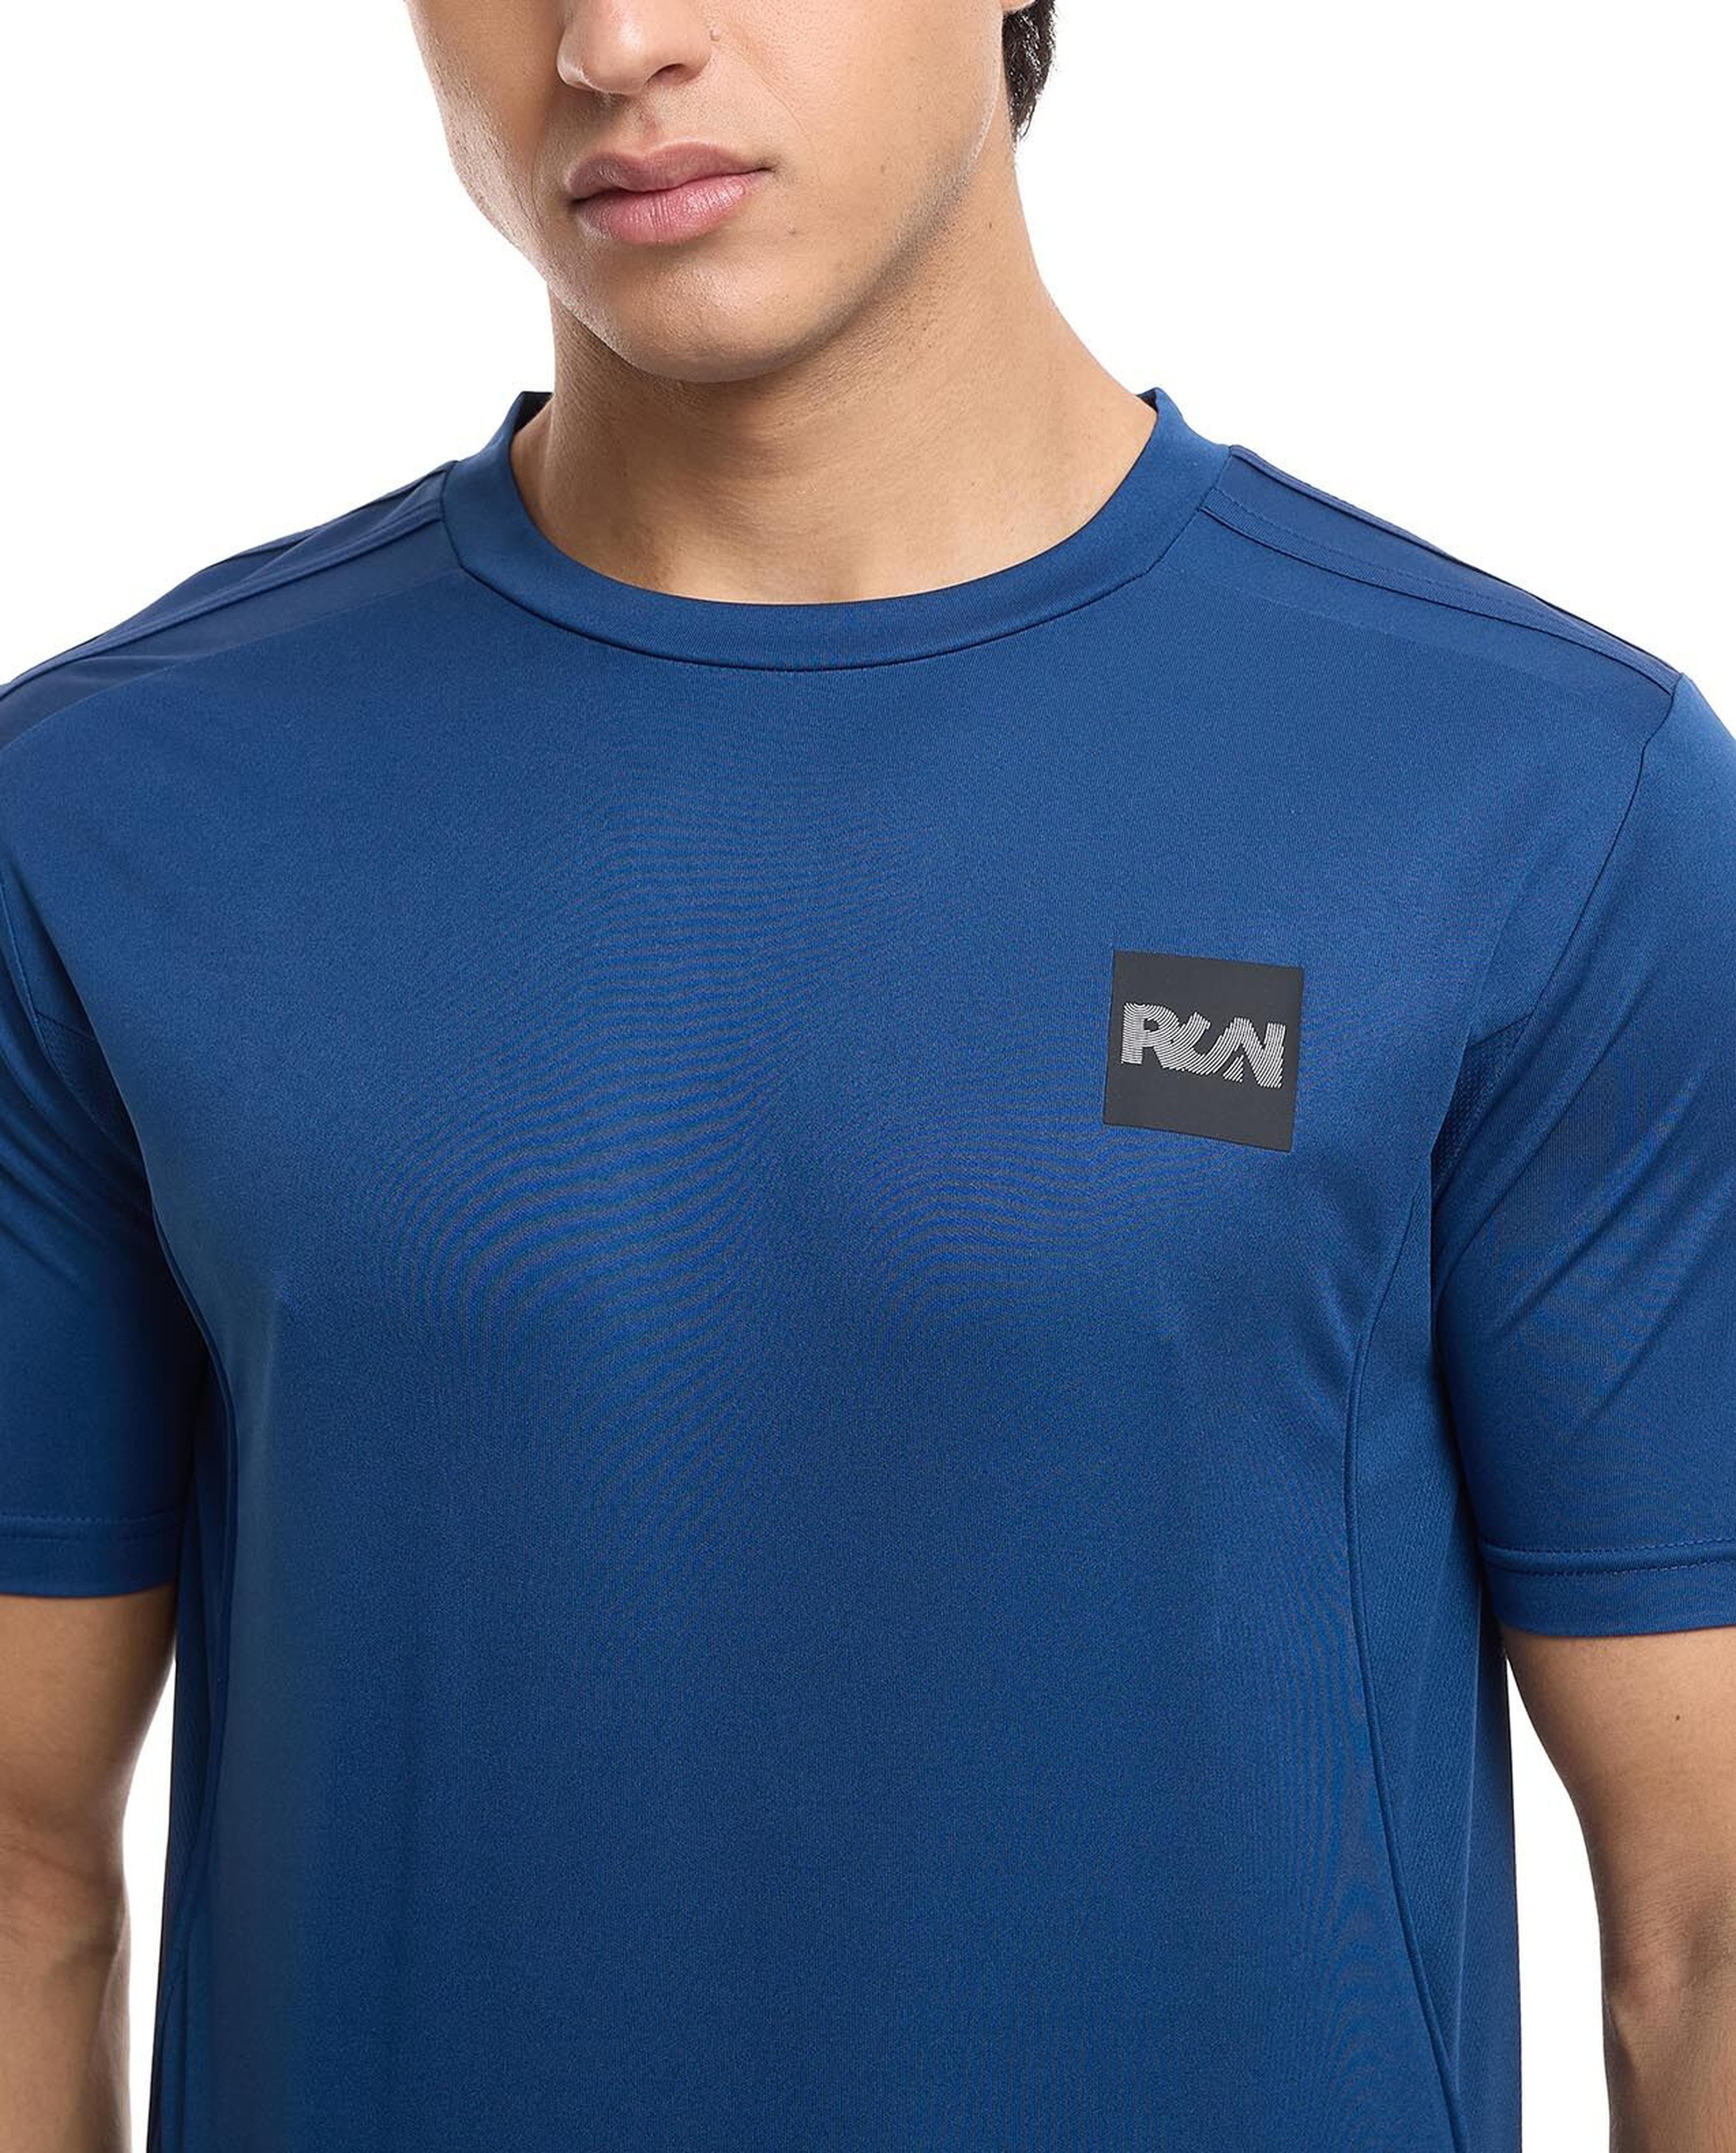 Logo Printed Active T-Shirt with Crew Neck and Short Sleeves